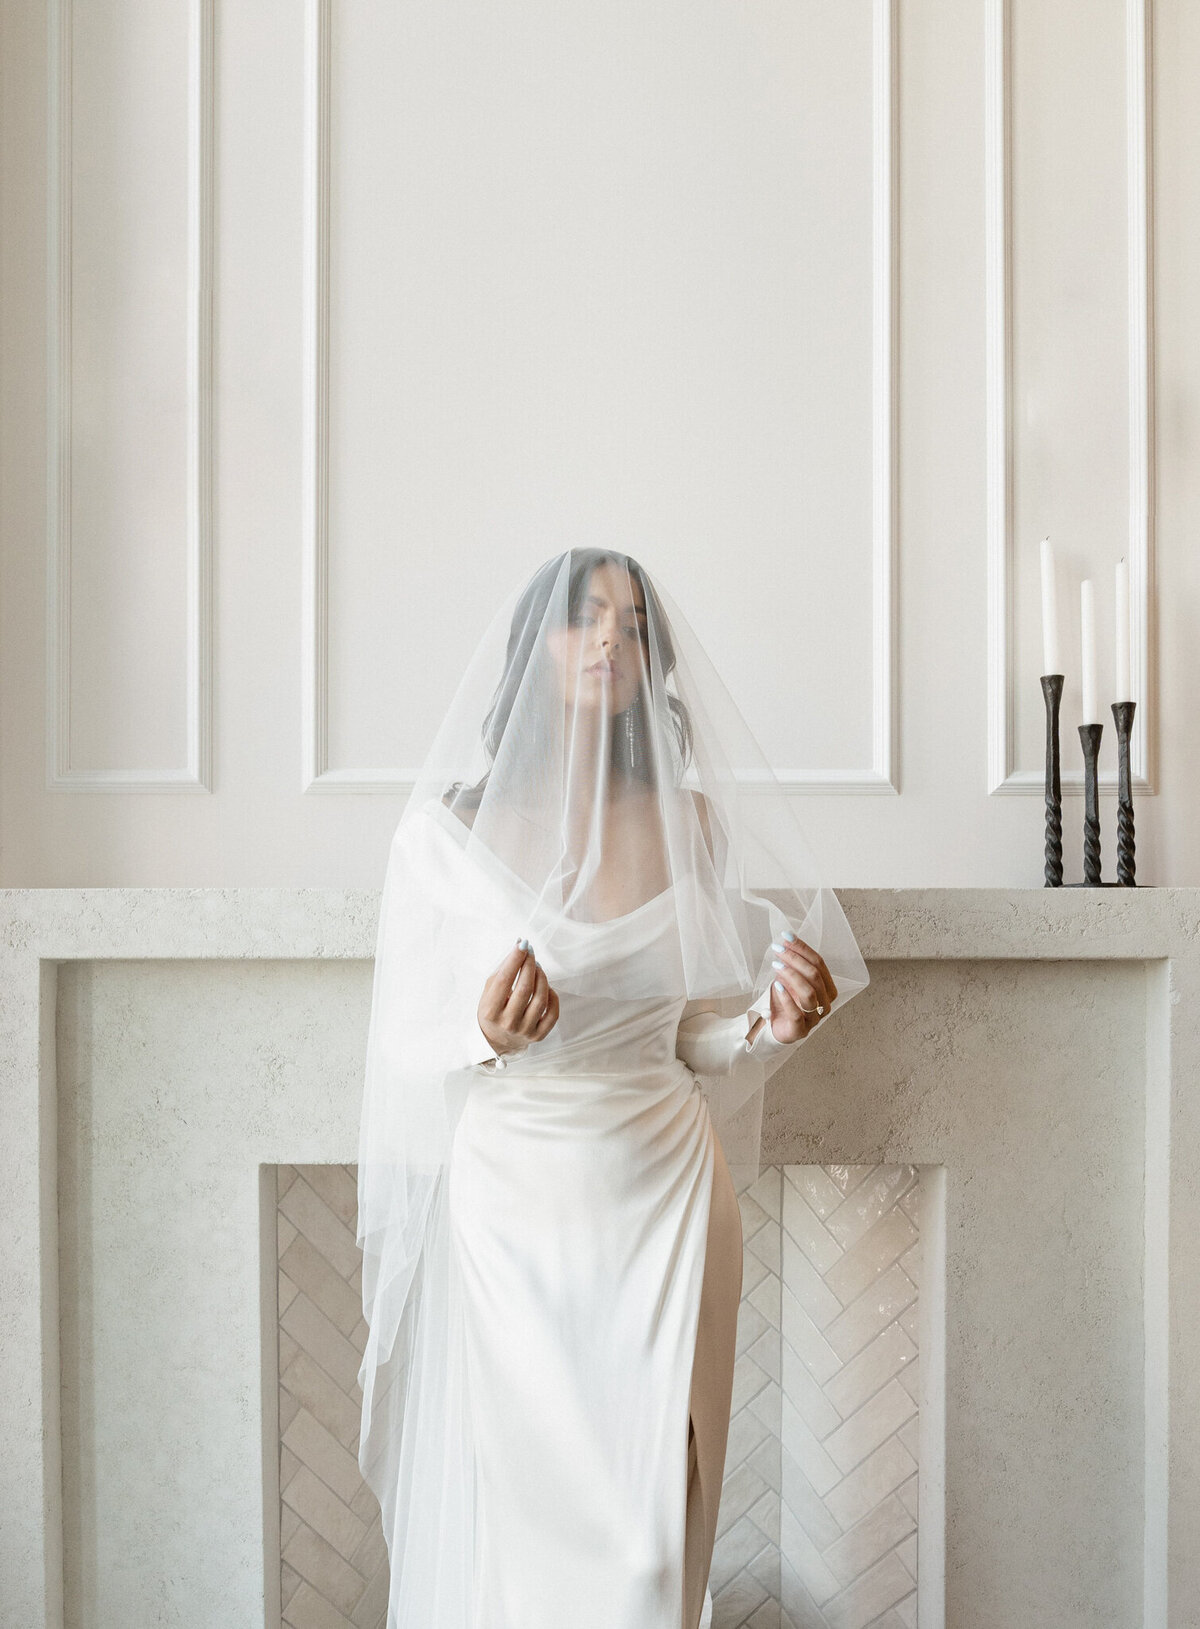 Blush & Raven, a couture wedding bridal boutique based in Calgary, Alberta. Featured on the Brontë Bride Vendor Guide.